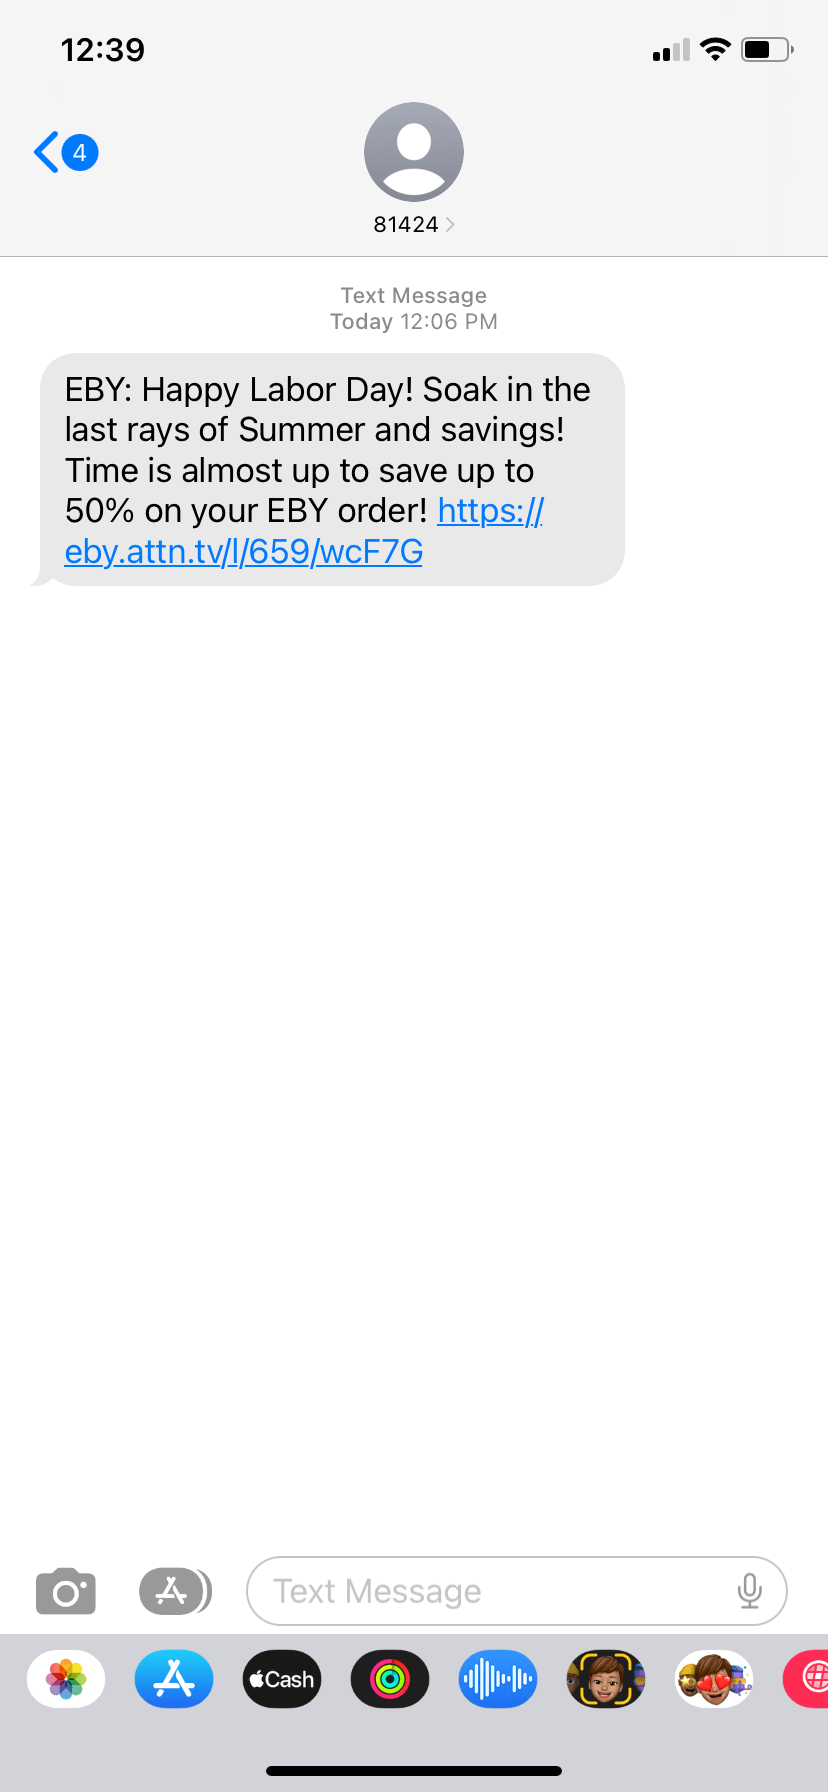 Screenshot of an EBY text that reads “EBY: Happy Labor Day! Soak in the last rays of Summer and savings! Time is almost up to save up to 50% on your EBY order! https://eby.attn.tv/l/659/wcF7G”